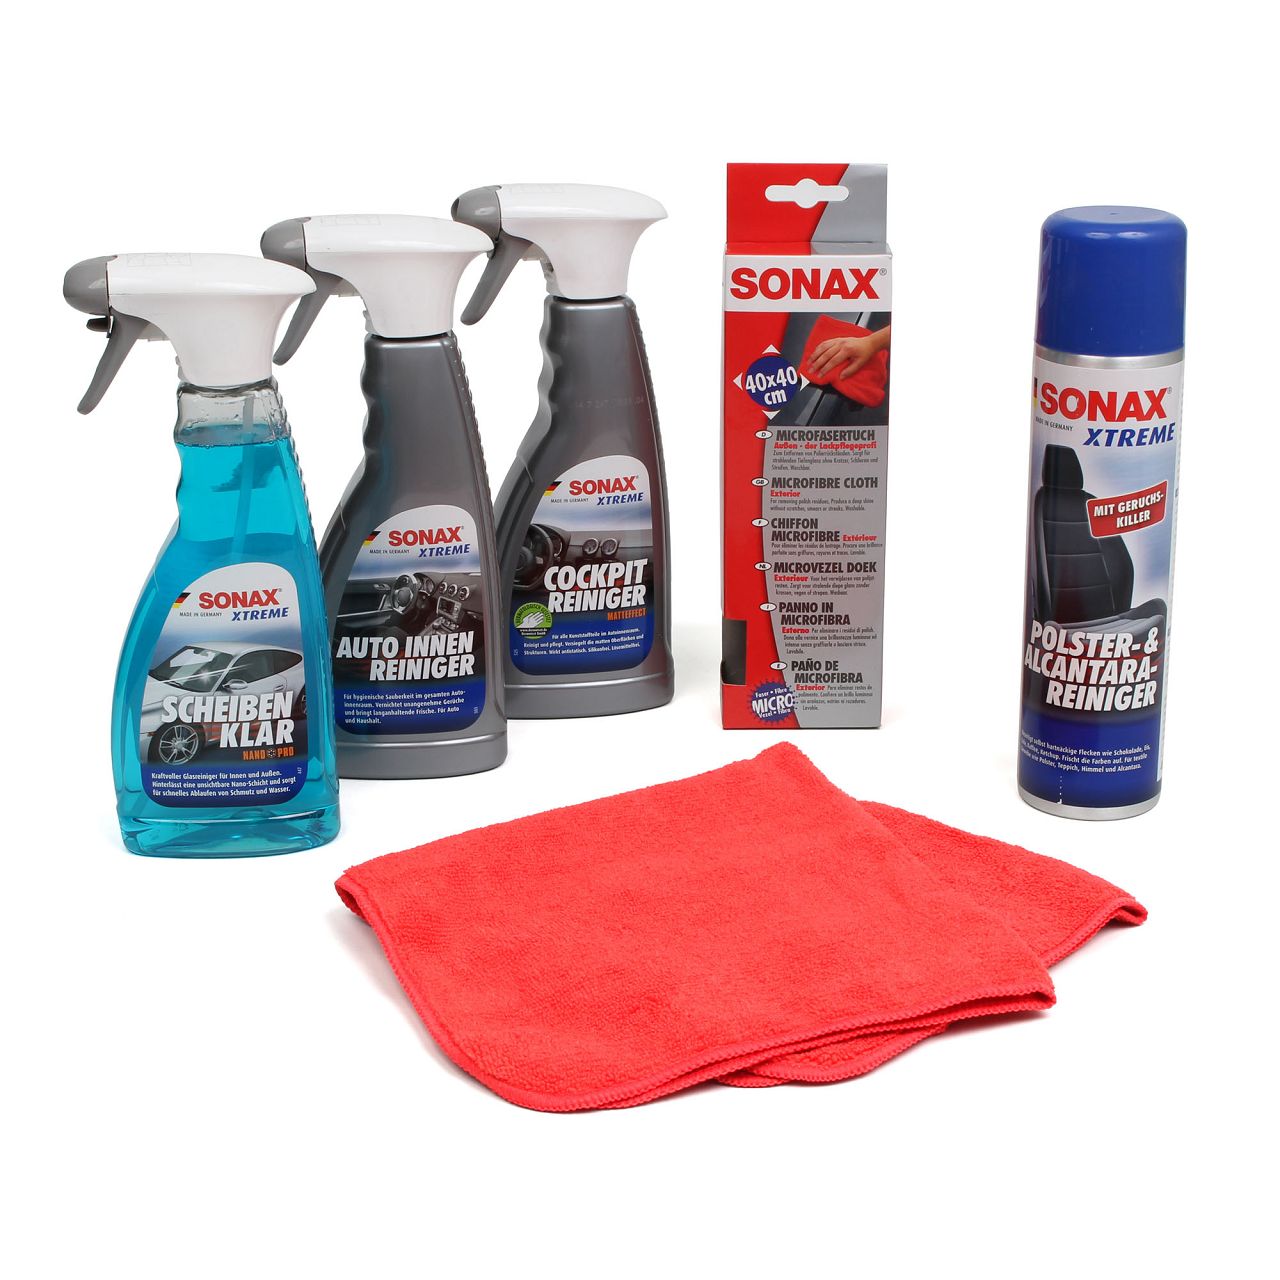  Cleaning agent for the interior cleaning of Sonax 